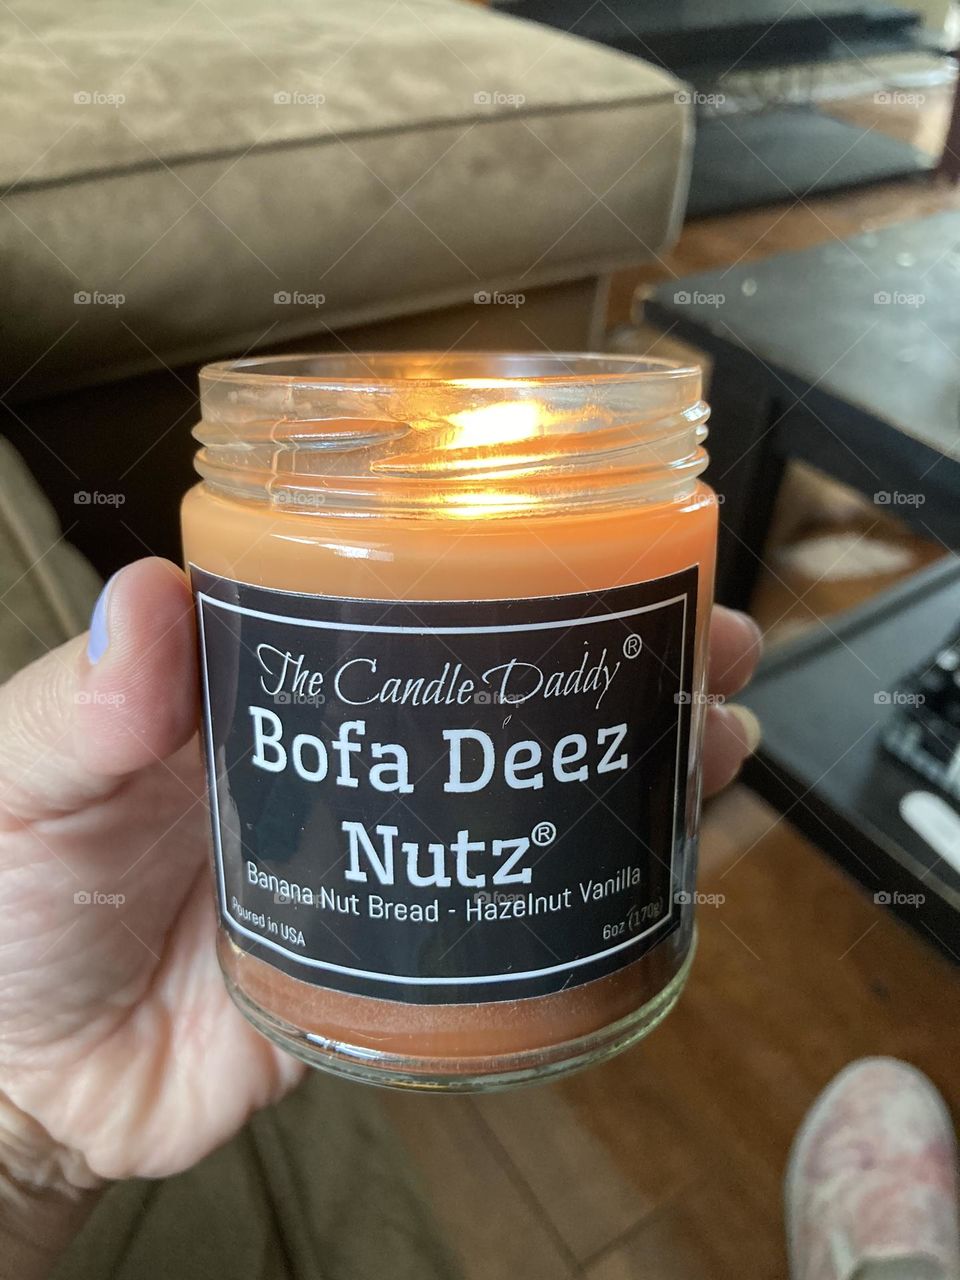 Bofa Deez Nuts candle by The Candle Daddy 